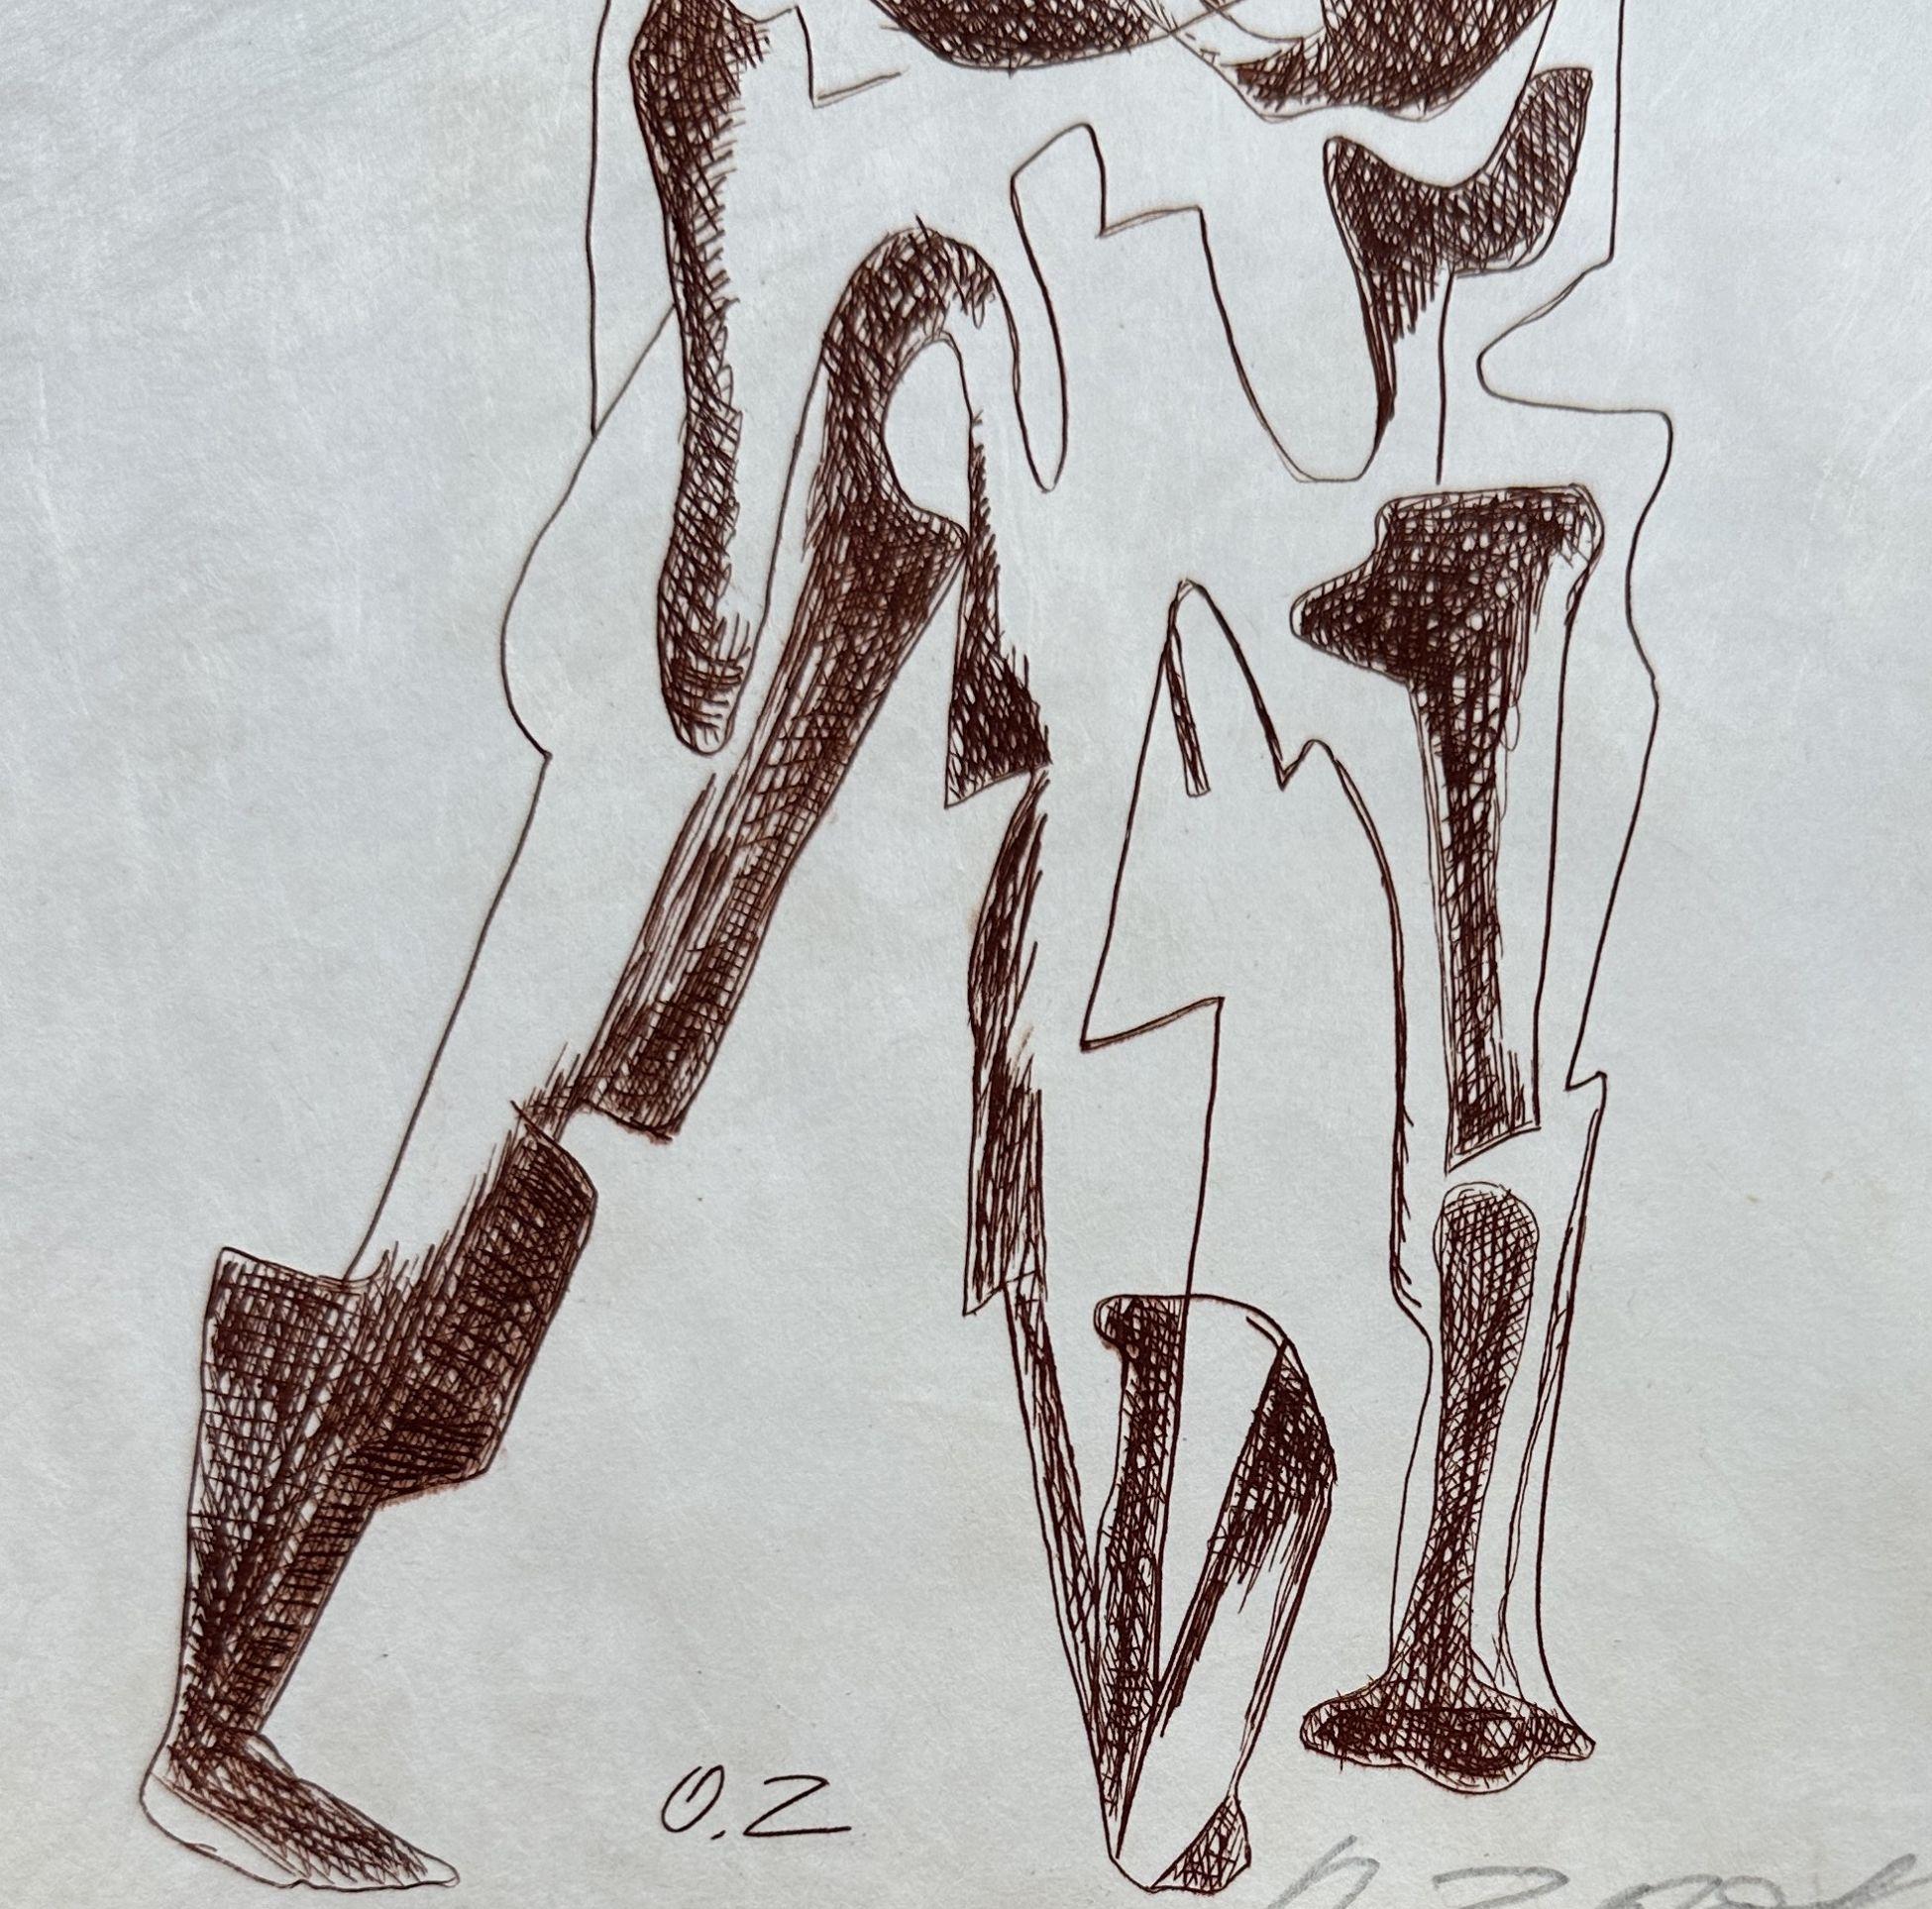 Ossip ZADKINE
The lovers, 1966

Original etching
Hand signed in pencil
Edition of 25 copies unnumbered
On Japon nacré paper size 25 x 16 cm (c. 10 x 6 in)
Very good condition

REFERENCE : Catalog raisonné 